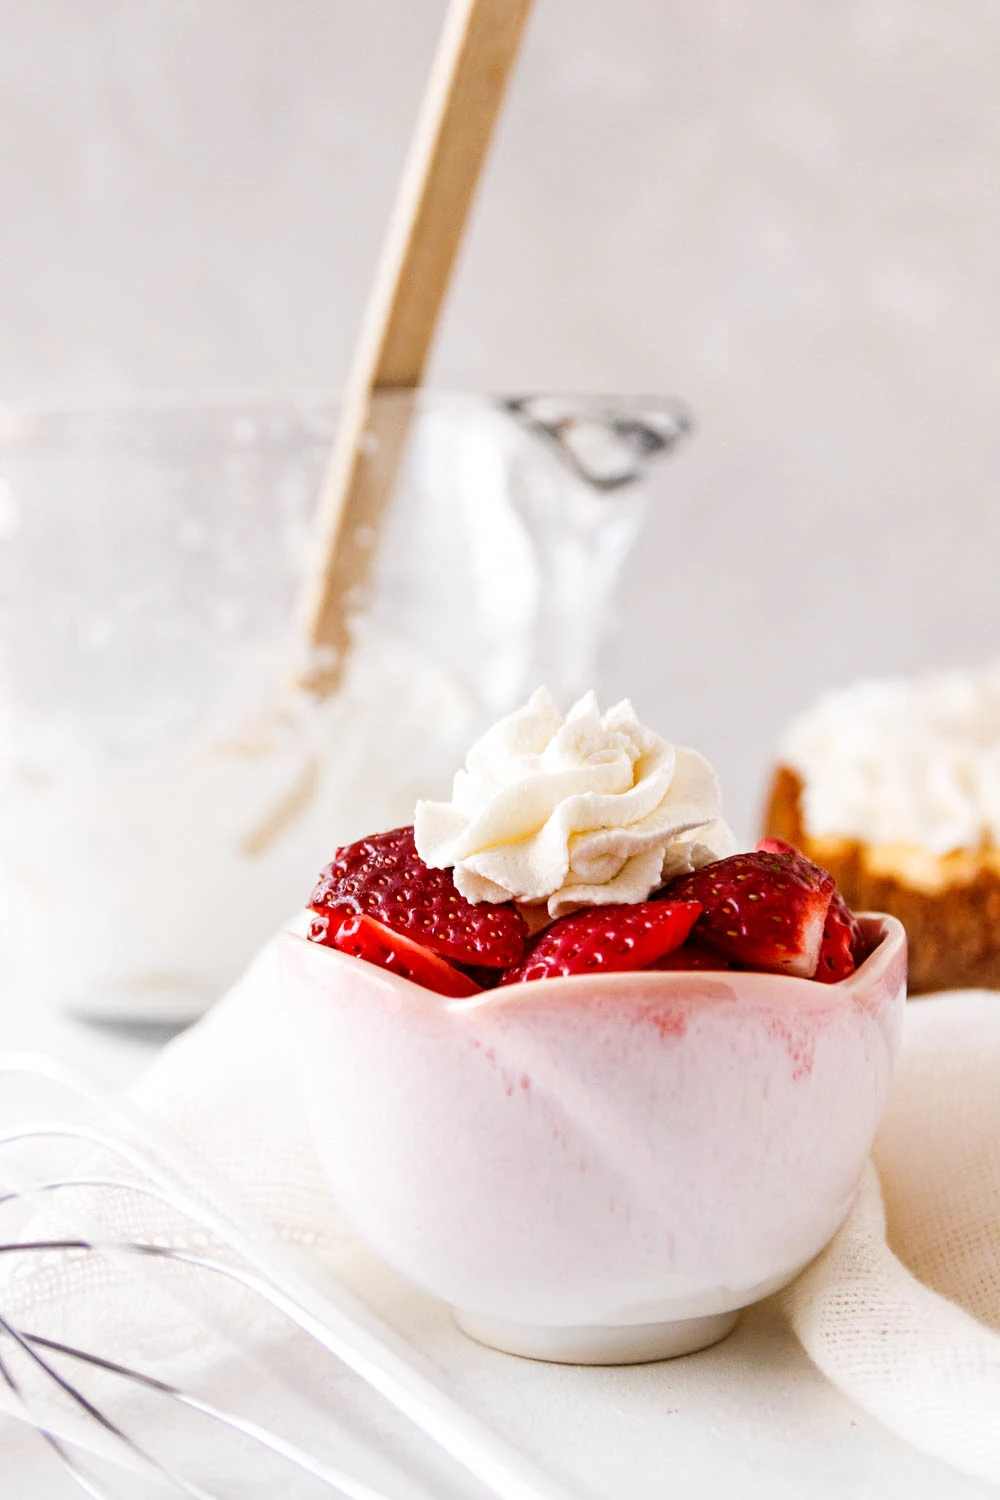 https://goodiegodmother.com/wp-content/uploads/2021/12/how-to-stabilize-whipped-cream-without-gelatin.jpg.webp